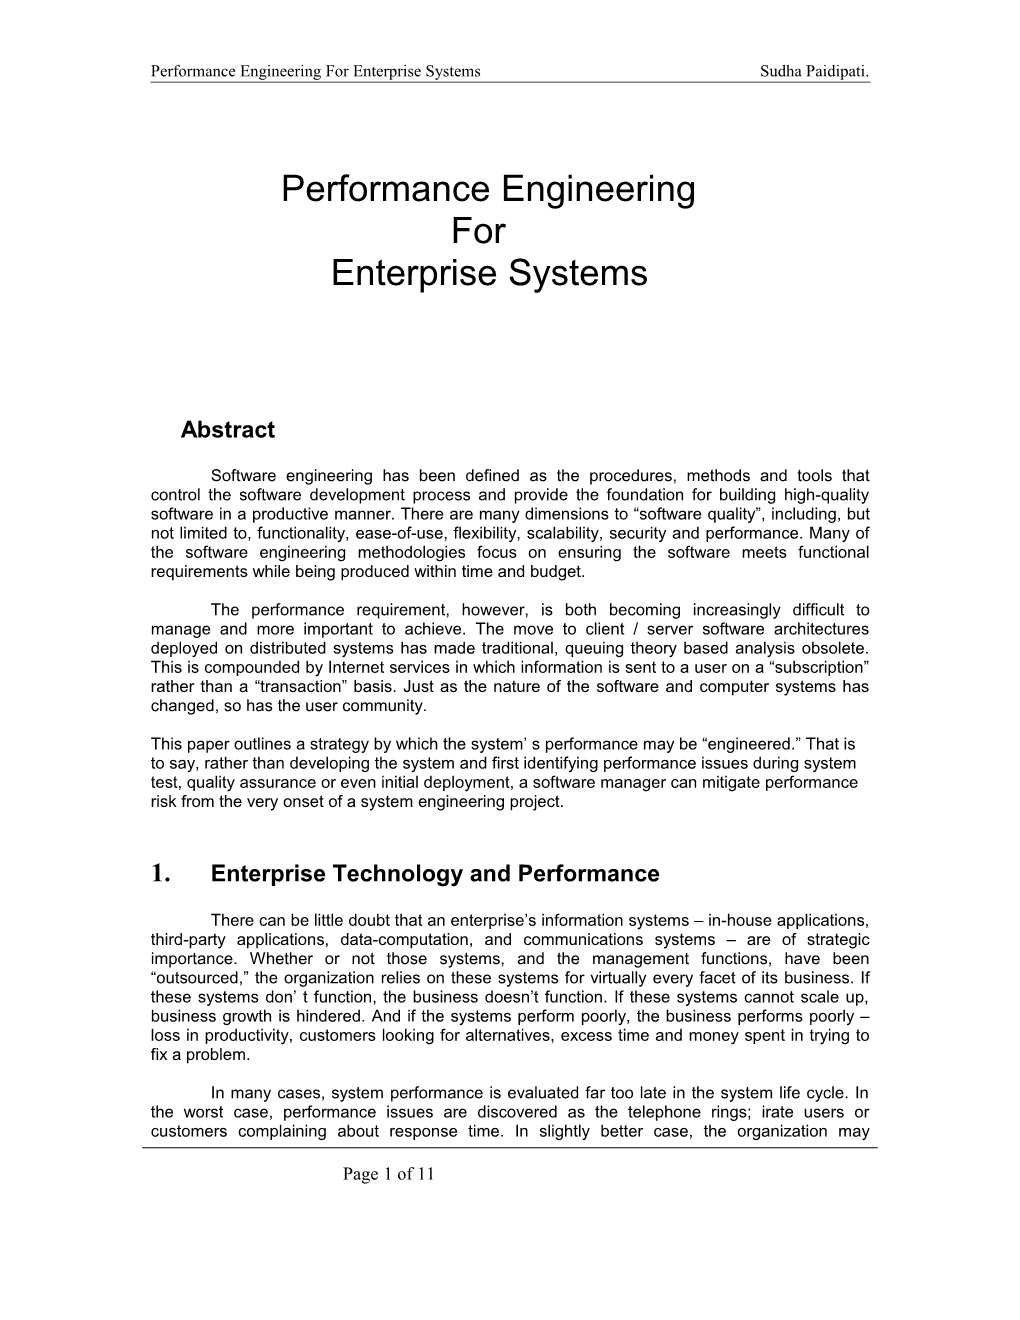 Performance Engineering for Enterprise Systems Sudha Paidipati